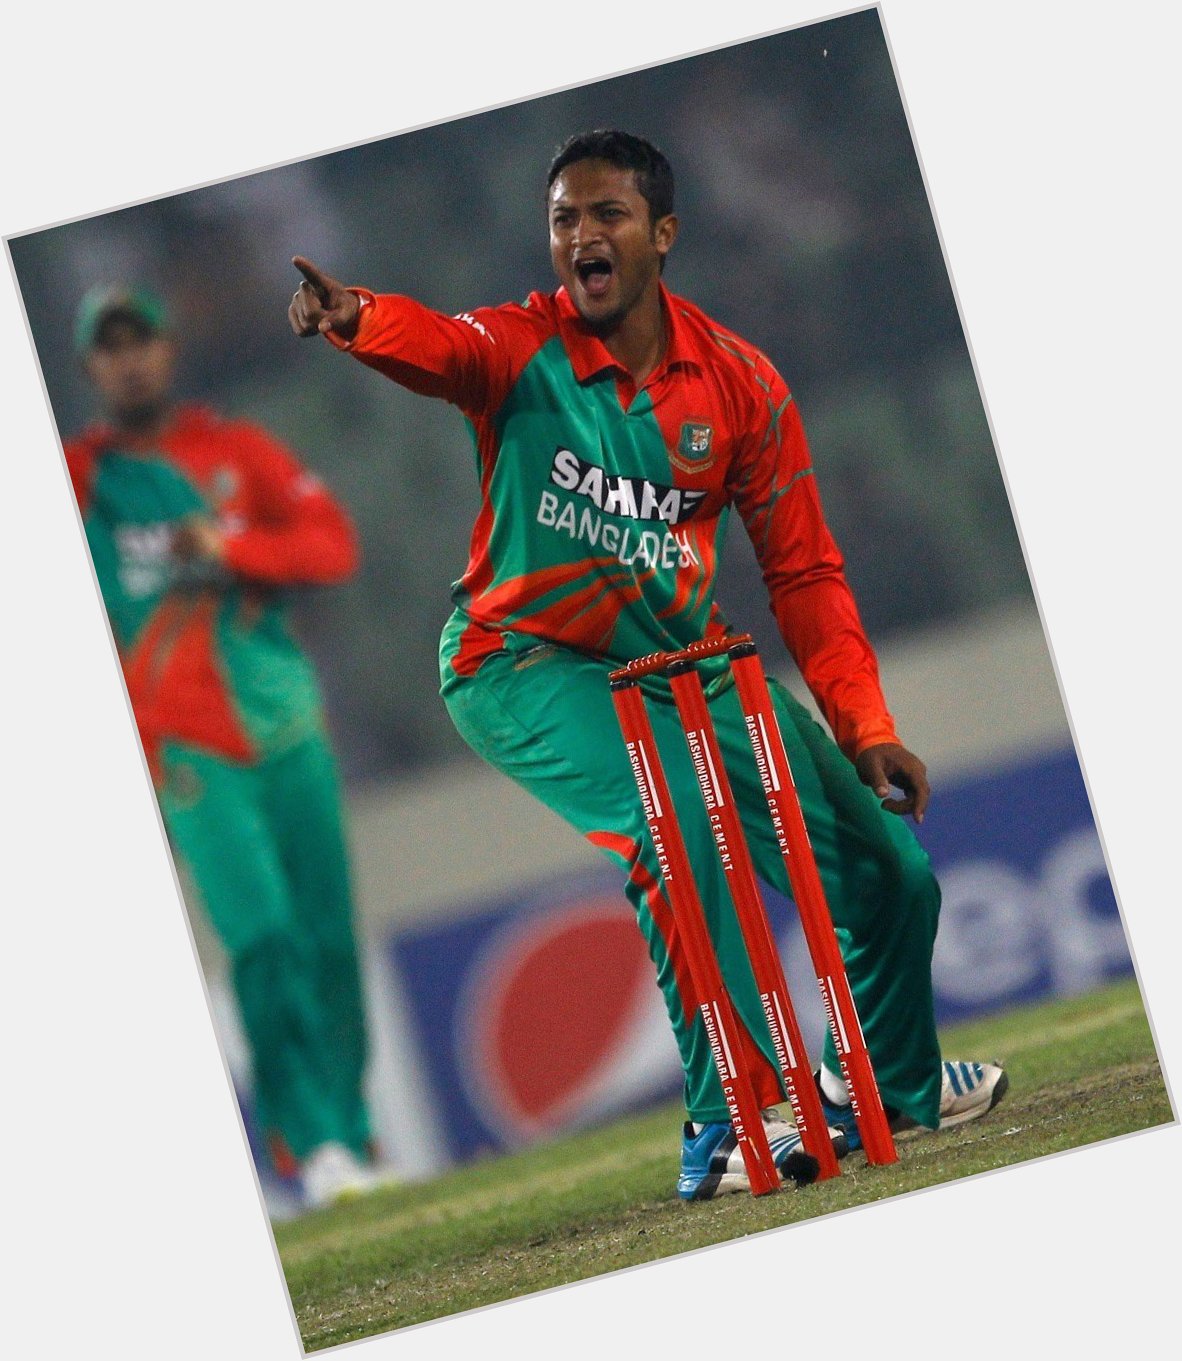 Happy birthday our legend  Shakib Al Hasan ... I hope you will make more  unbreakable world records in future..  